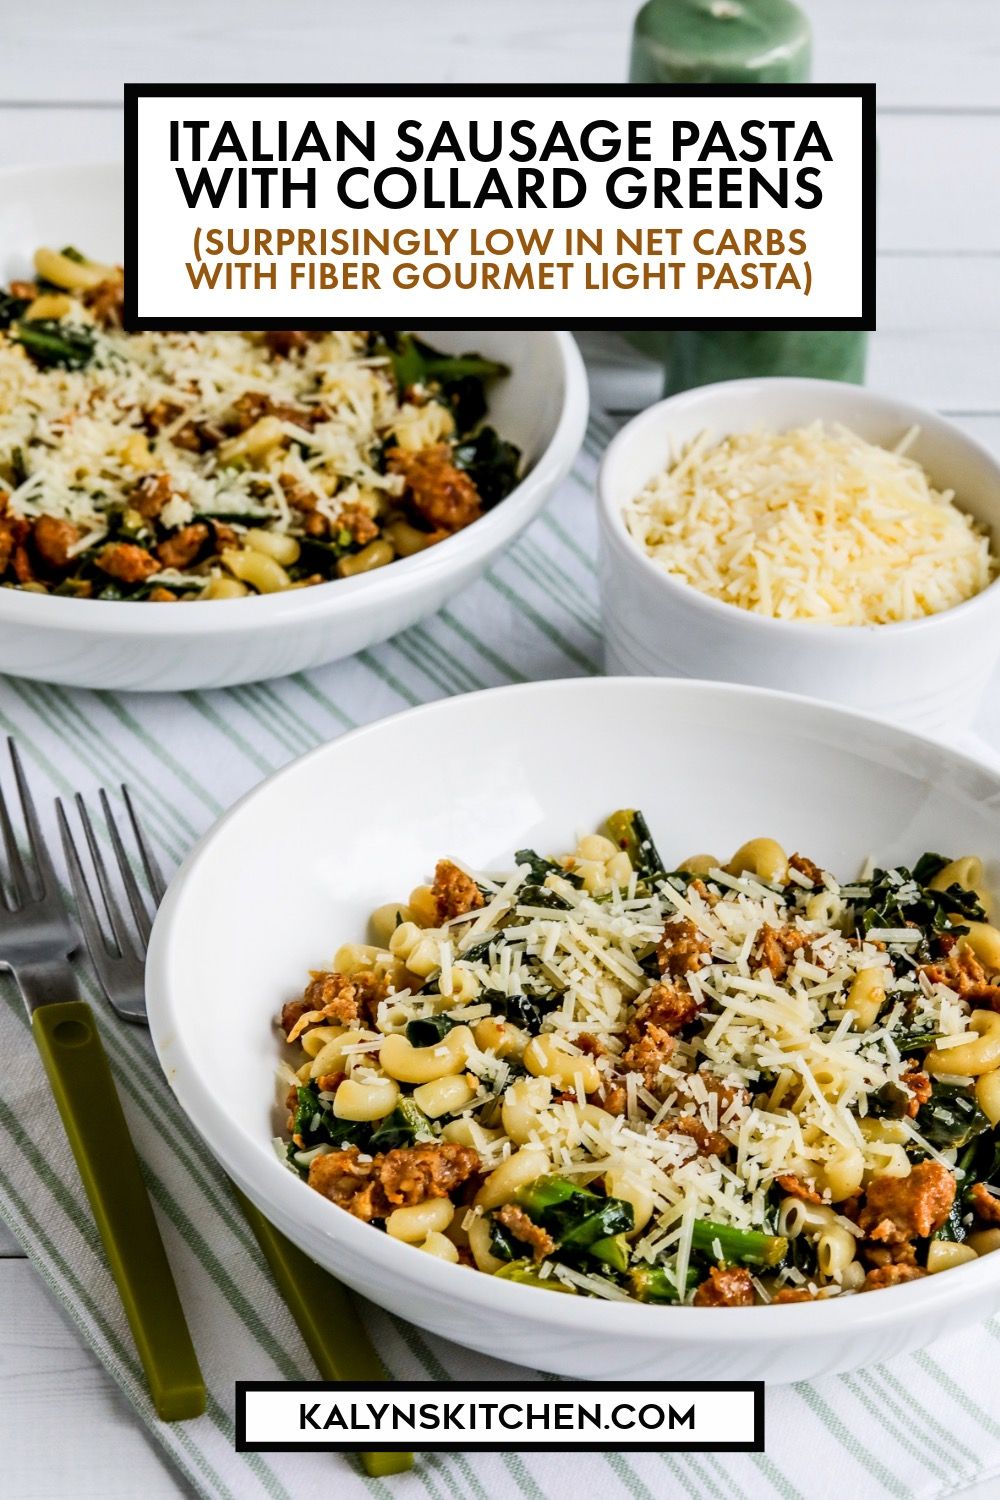 Pinterest image for Italian Sausage Pasta with Collard Greens showing two servings in bowls with Parmesan cheese.